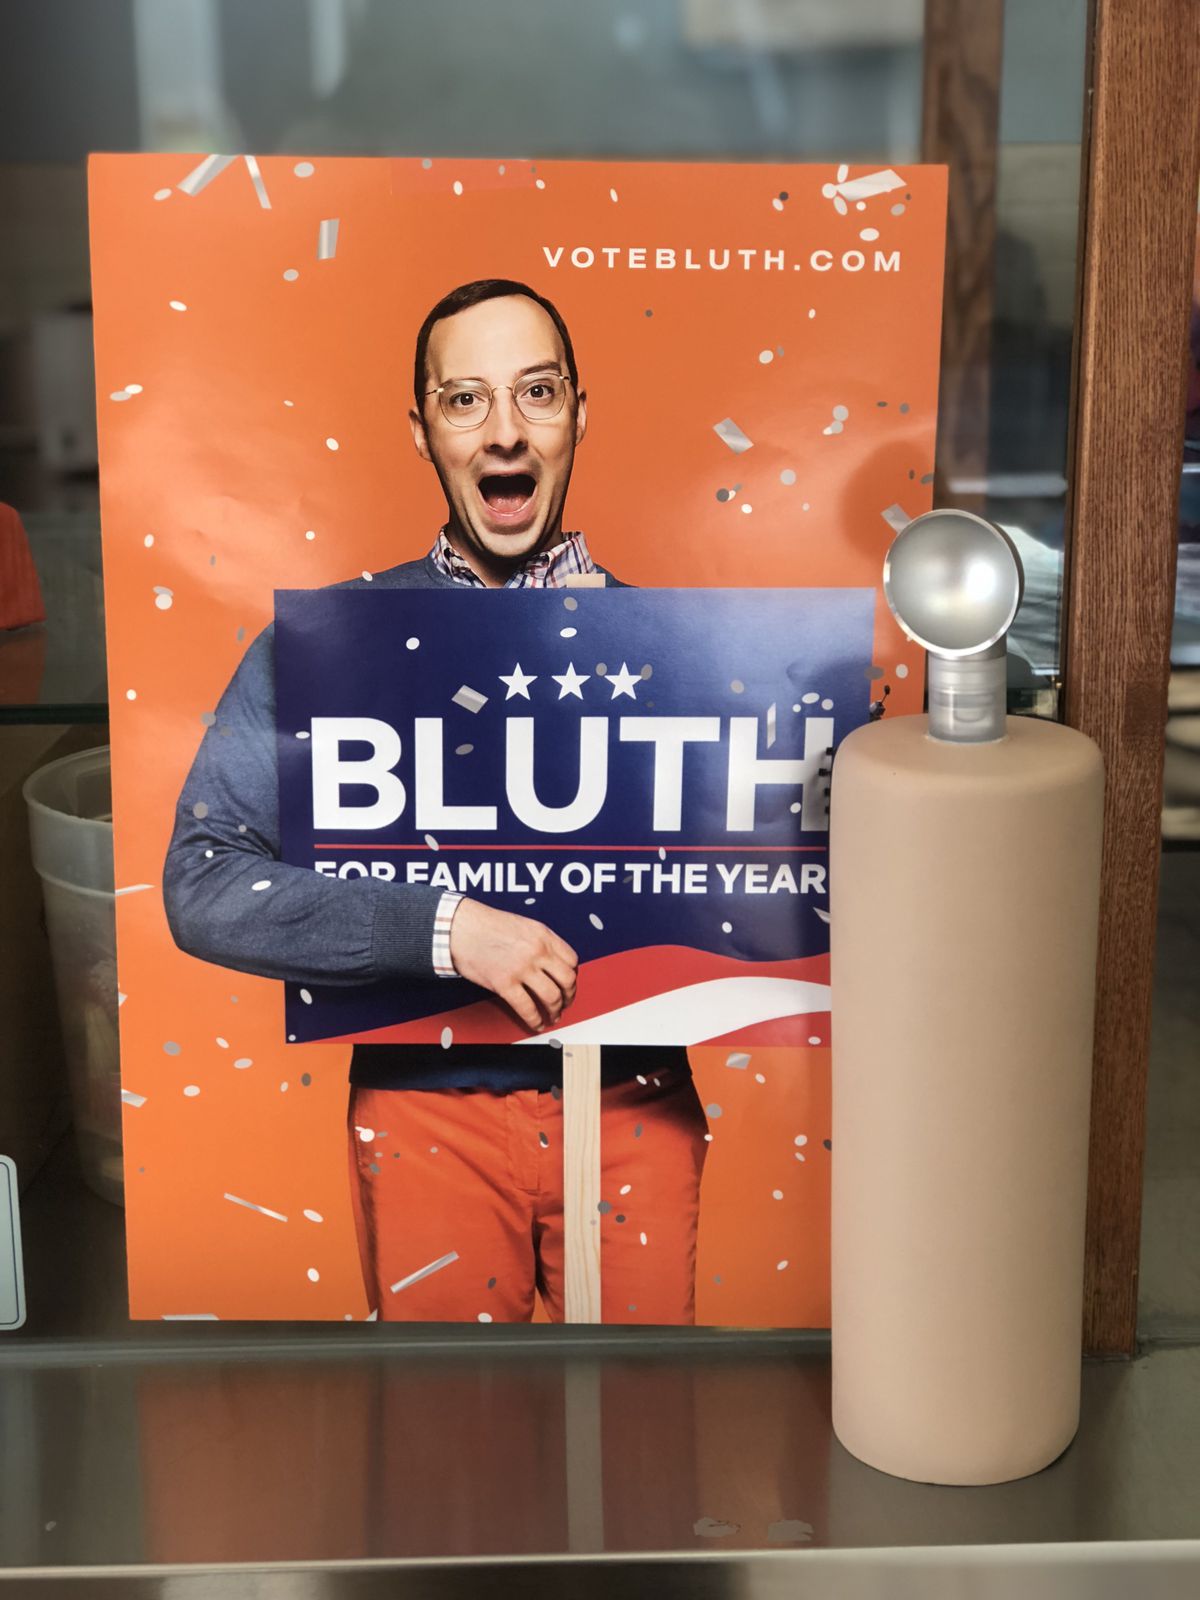 Buster Bluth’s prosthetic arm ice cream scooper